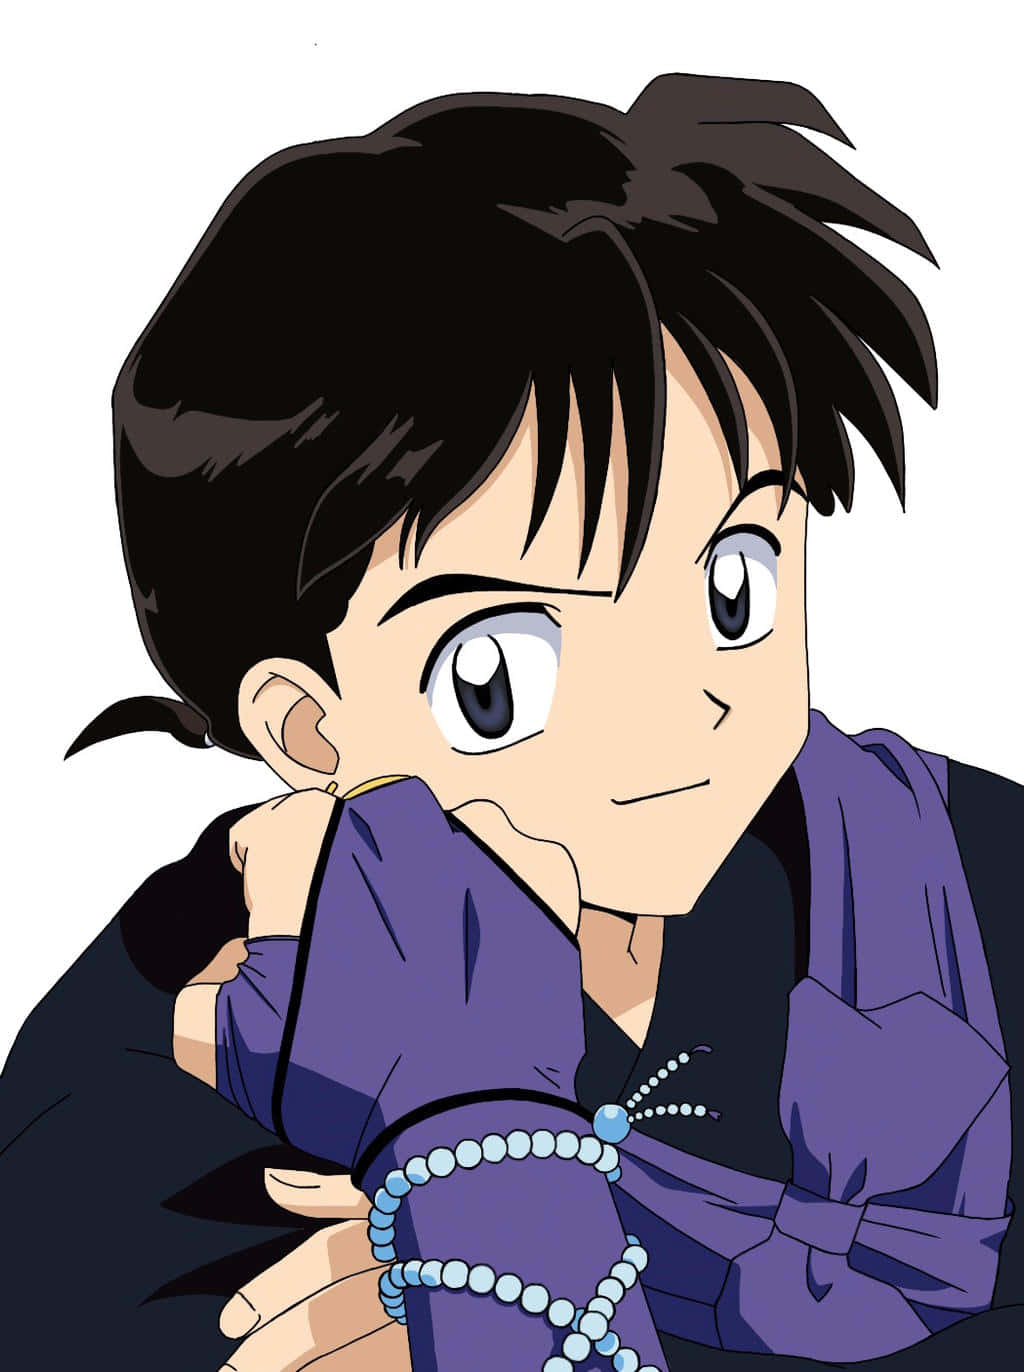 Miroku, the wise monk from InuYasha anime series, standing tall against a captivating sky. Wallpaper